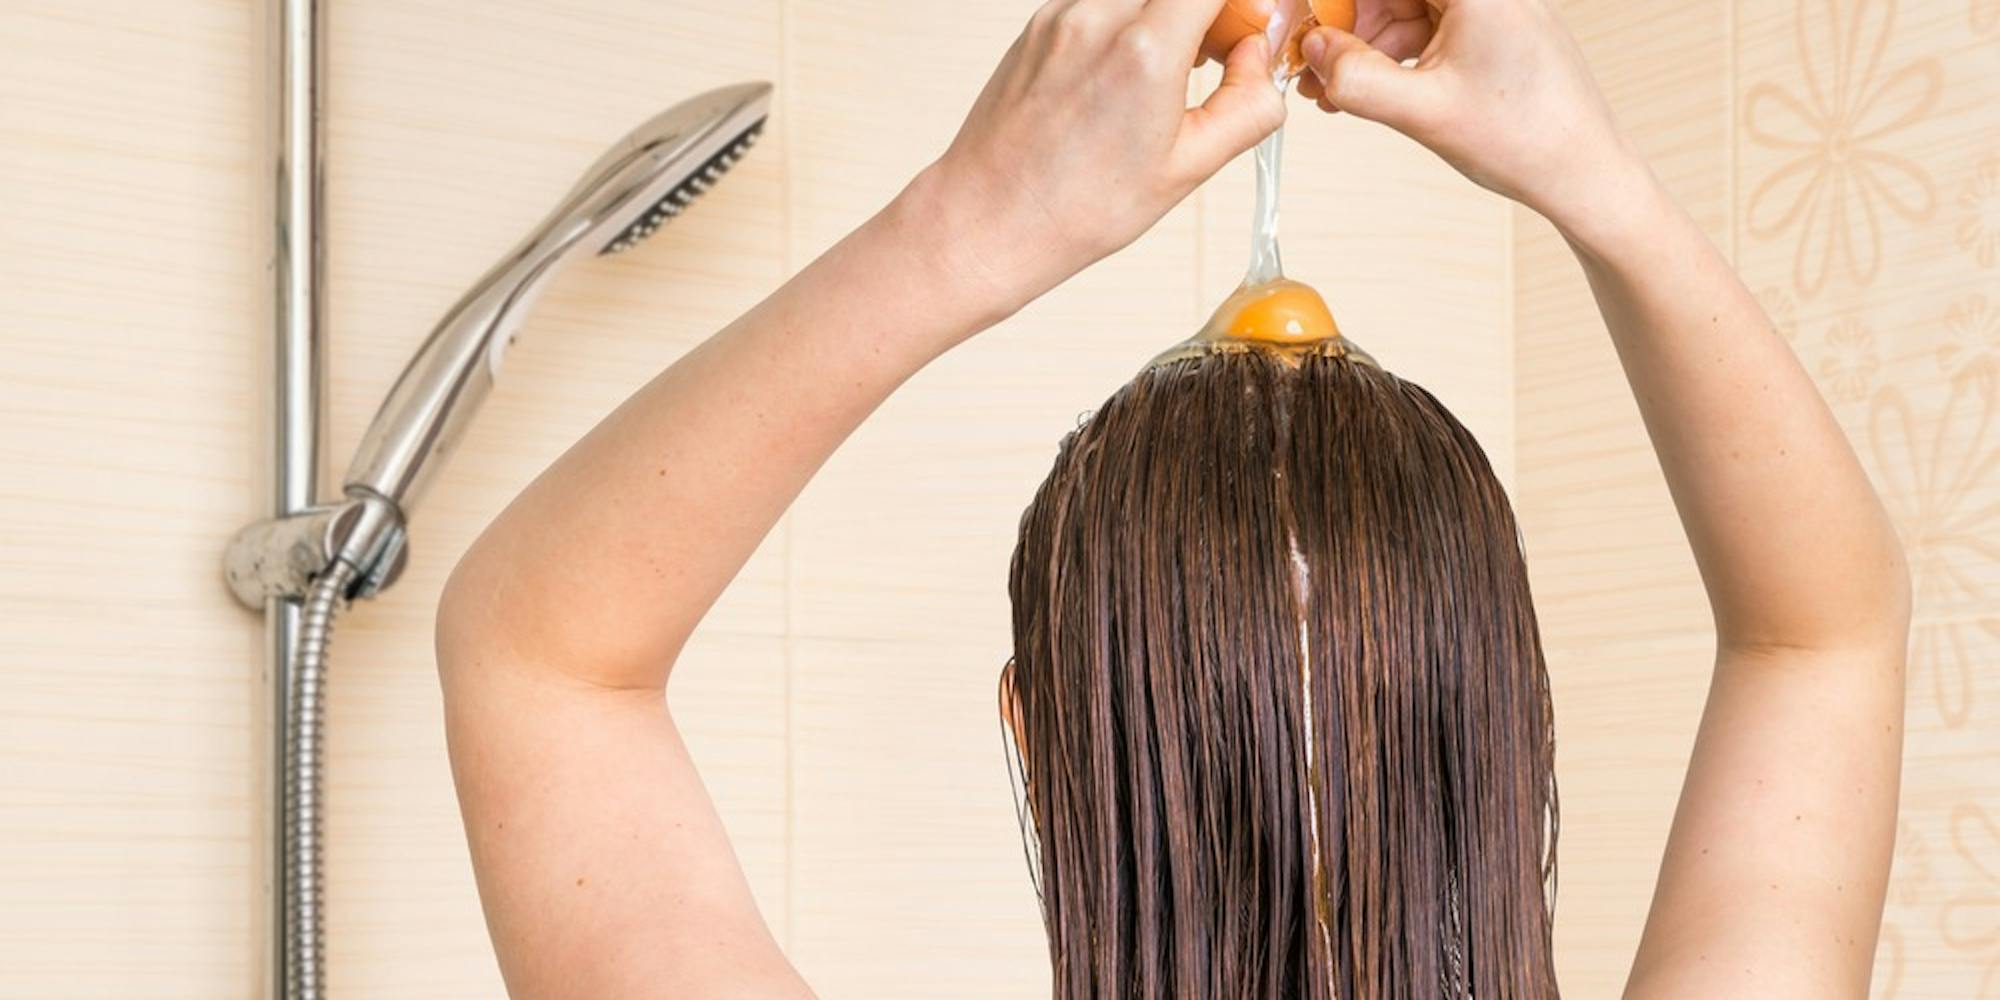 Egg Mask For The Hair – What Is It And How Does It Work? | Nutrafol